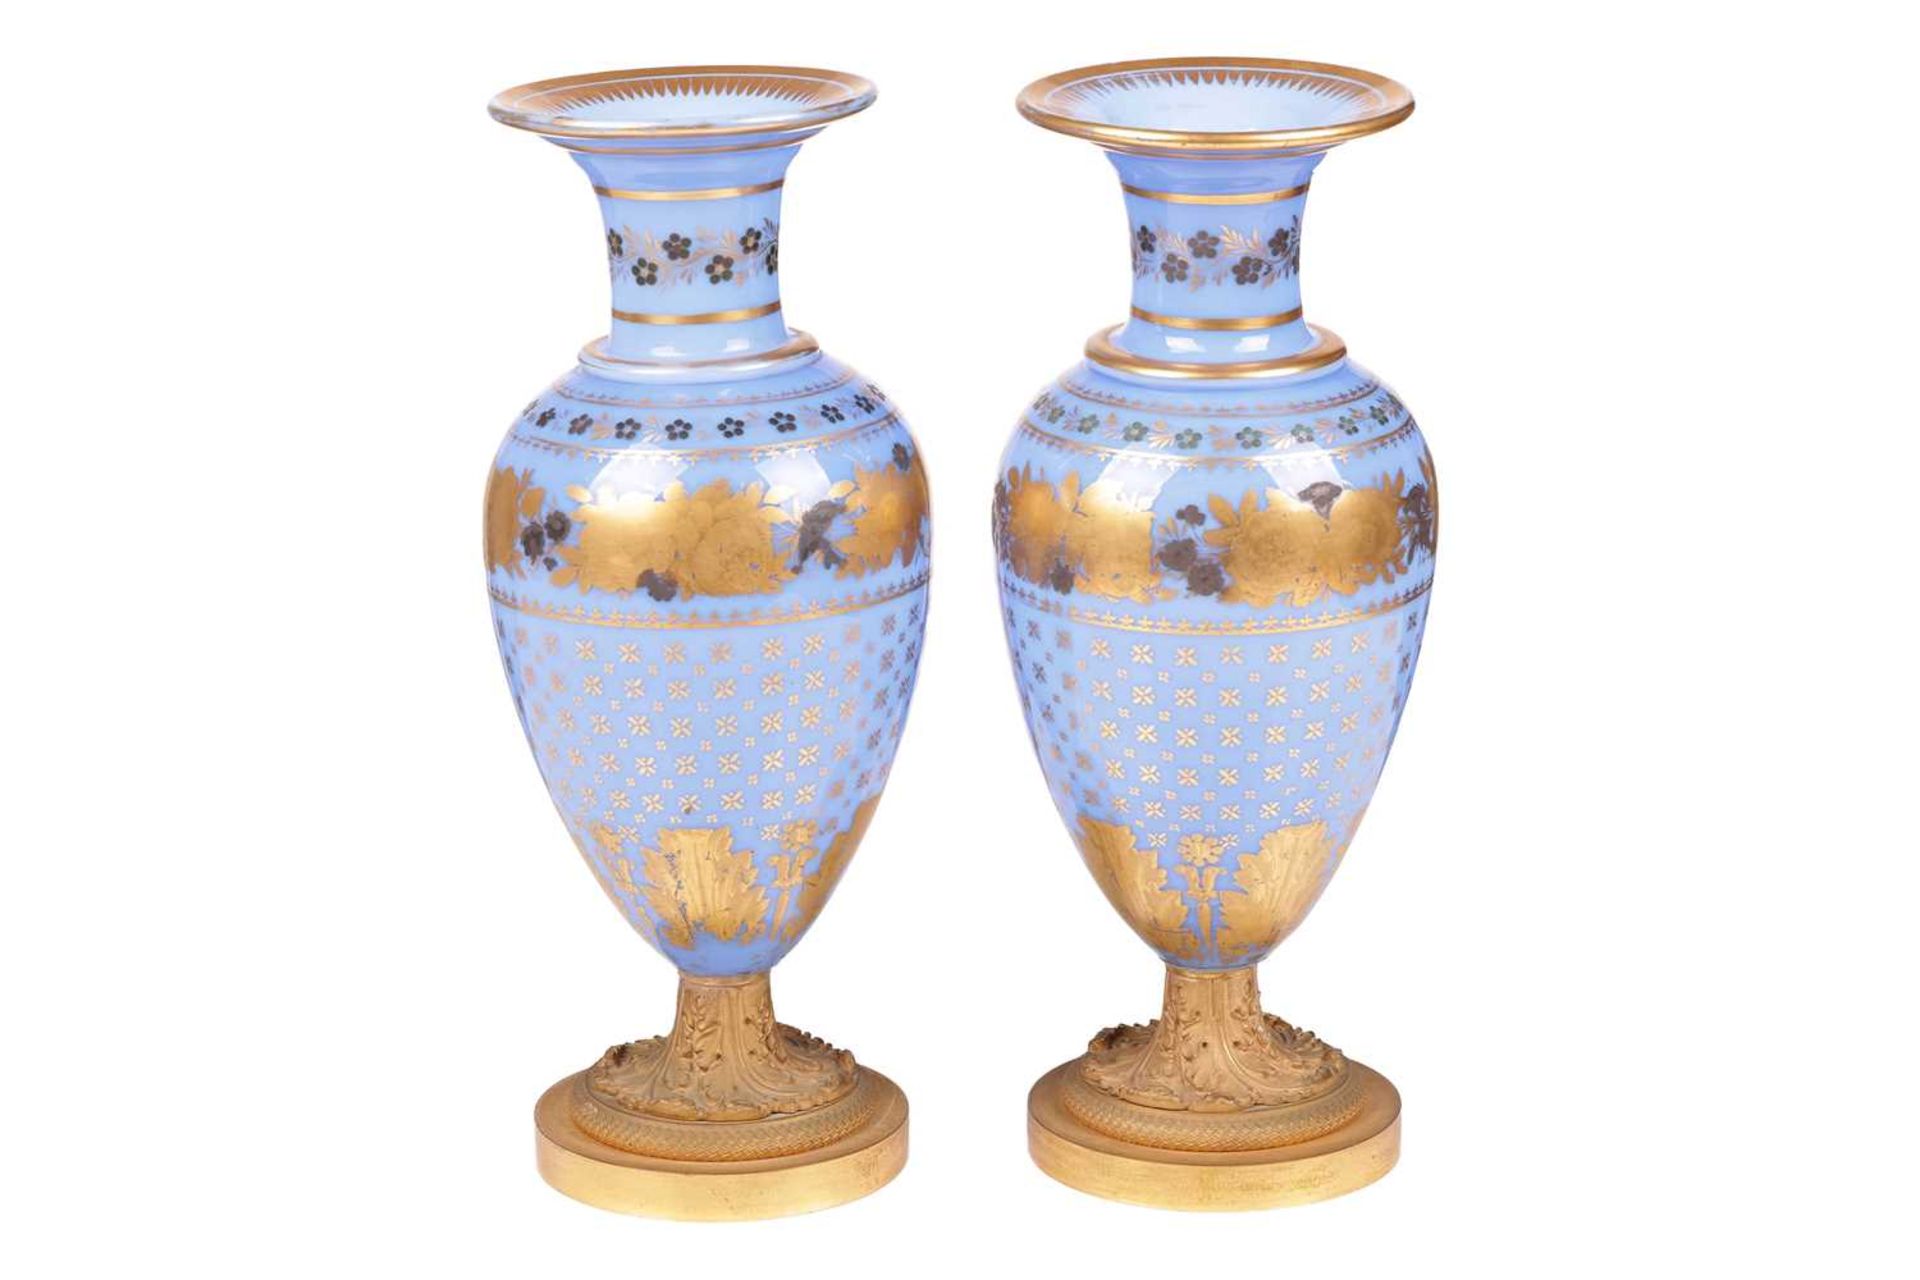 A pair of late 19th century French blue opaline glass and ormolu mounted vases, with gilt-overlaid d - Image 3 of 7